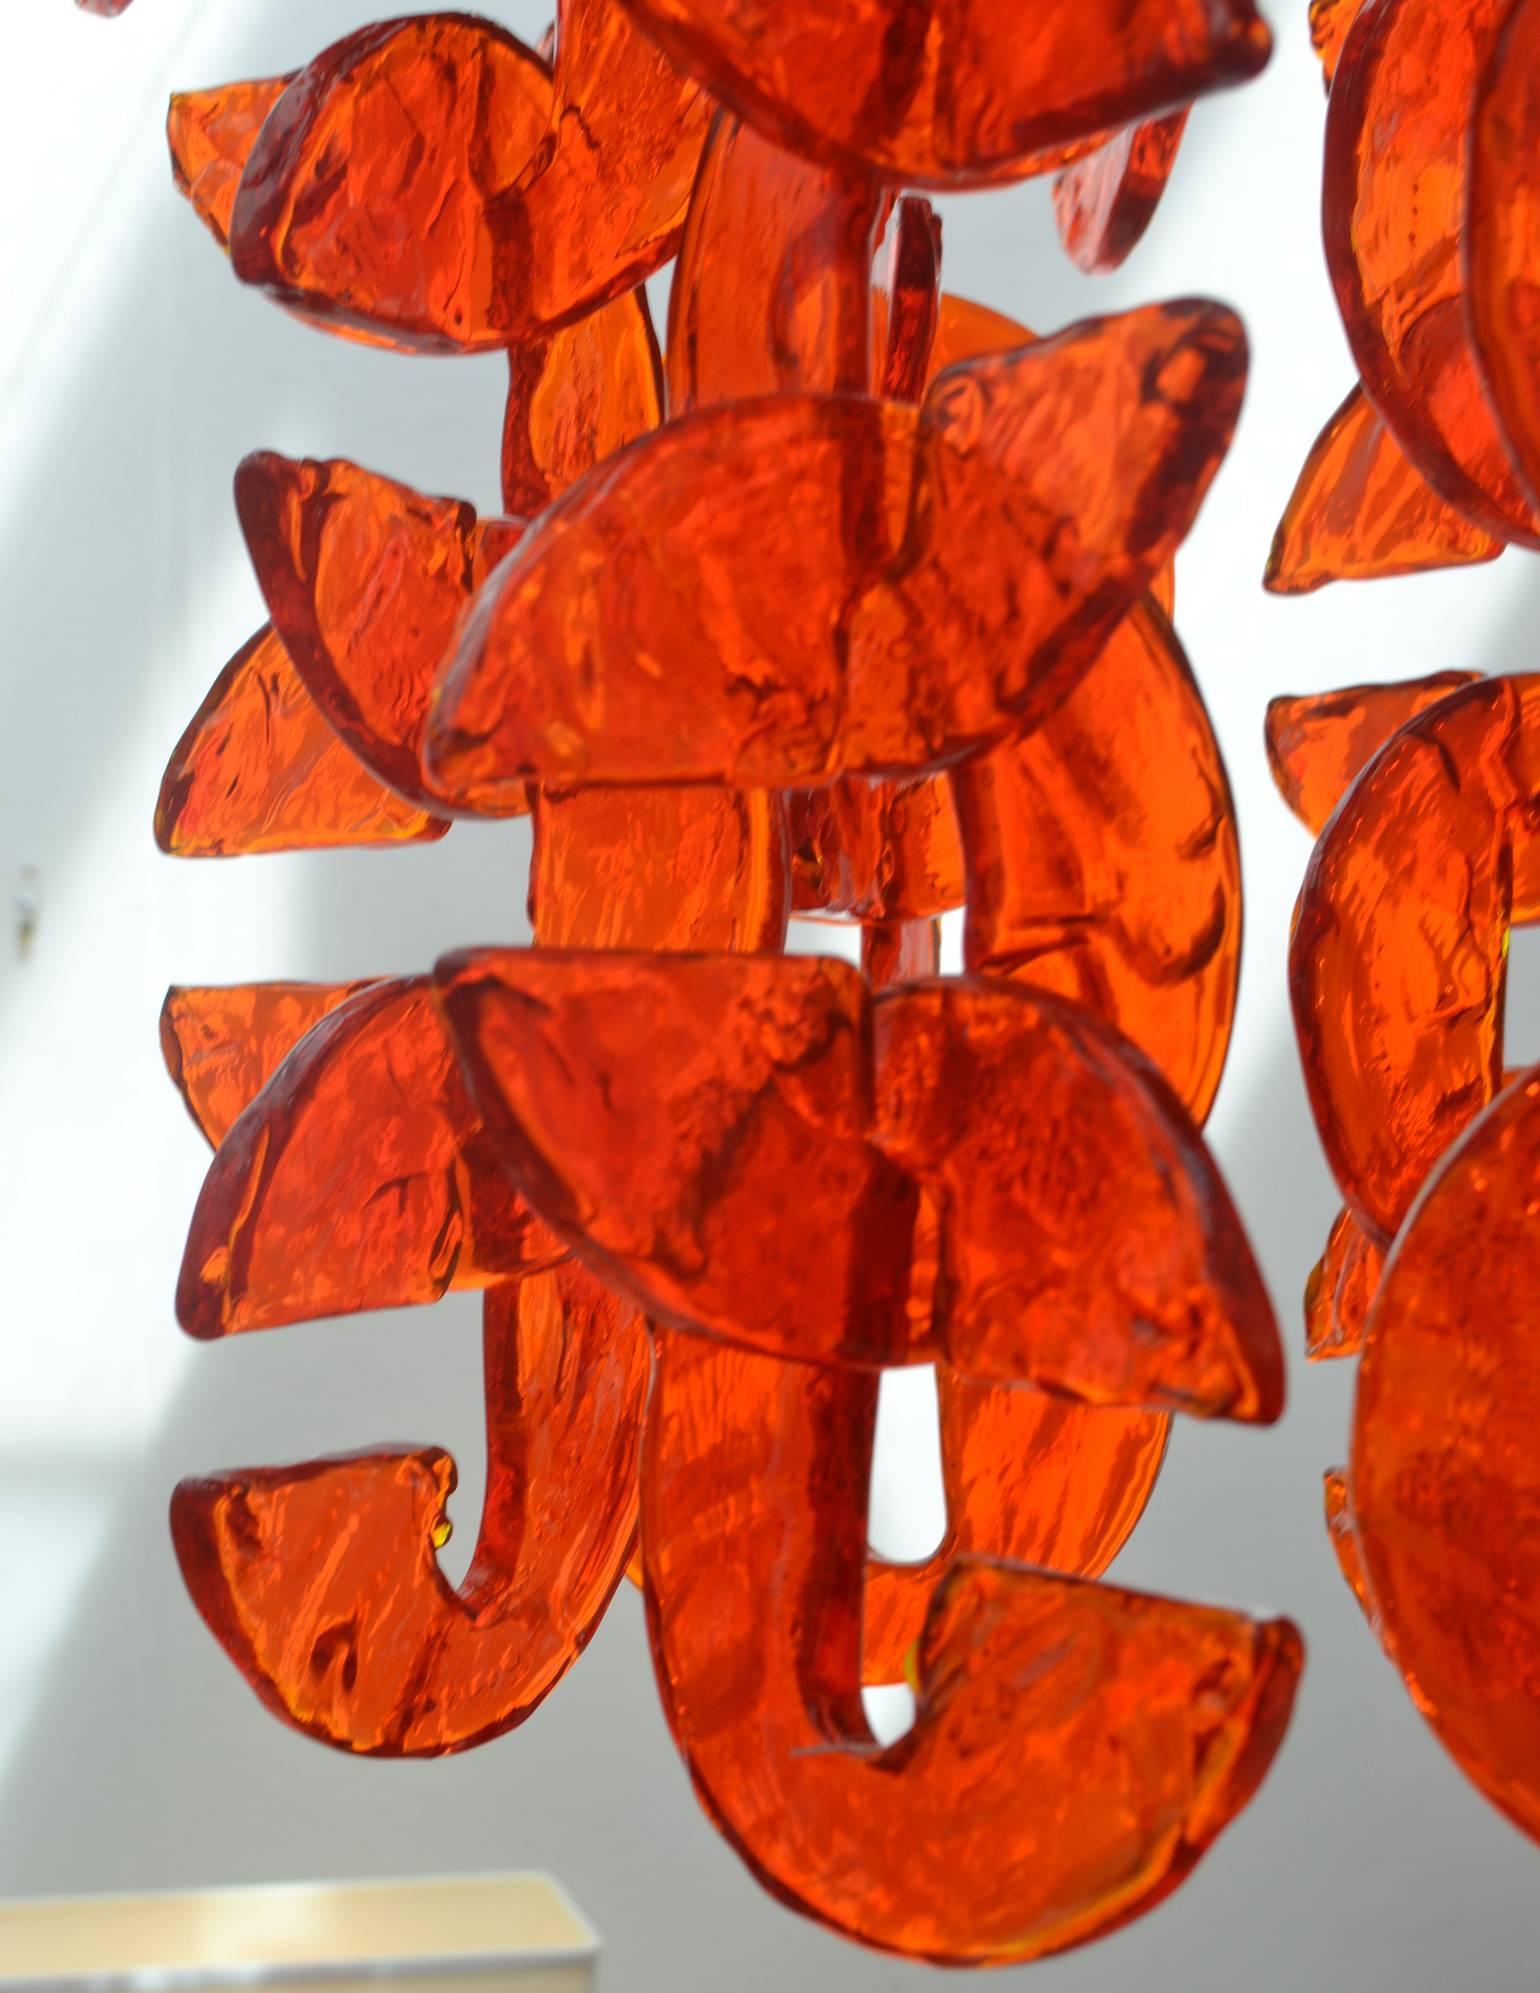 Bright orange colored 1960's chandelier with over a hundred glass pieces shaped in abstract letter 'C' hooks into each other forming a cascade of strands that can be adjusted into different design.

The height of the glass chandelier is 85 cm max.